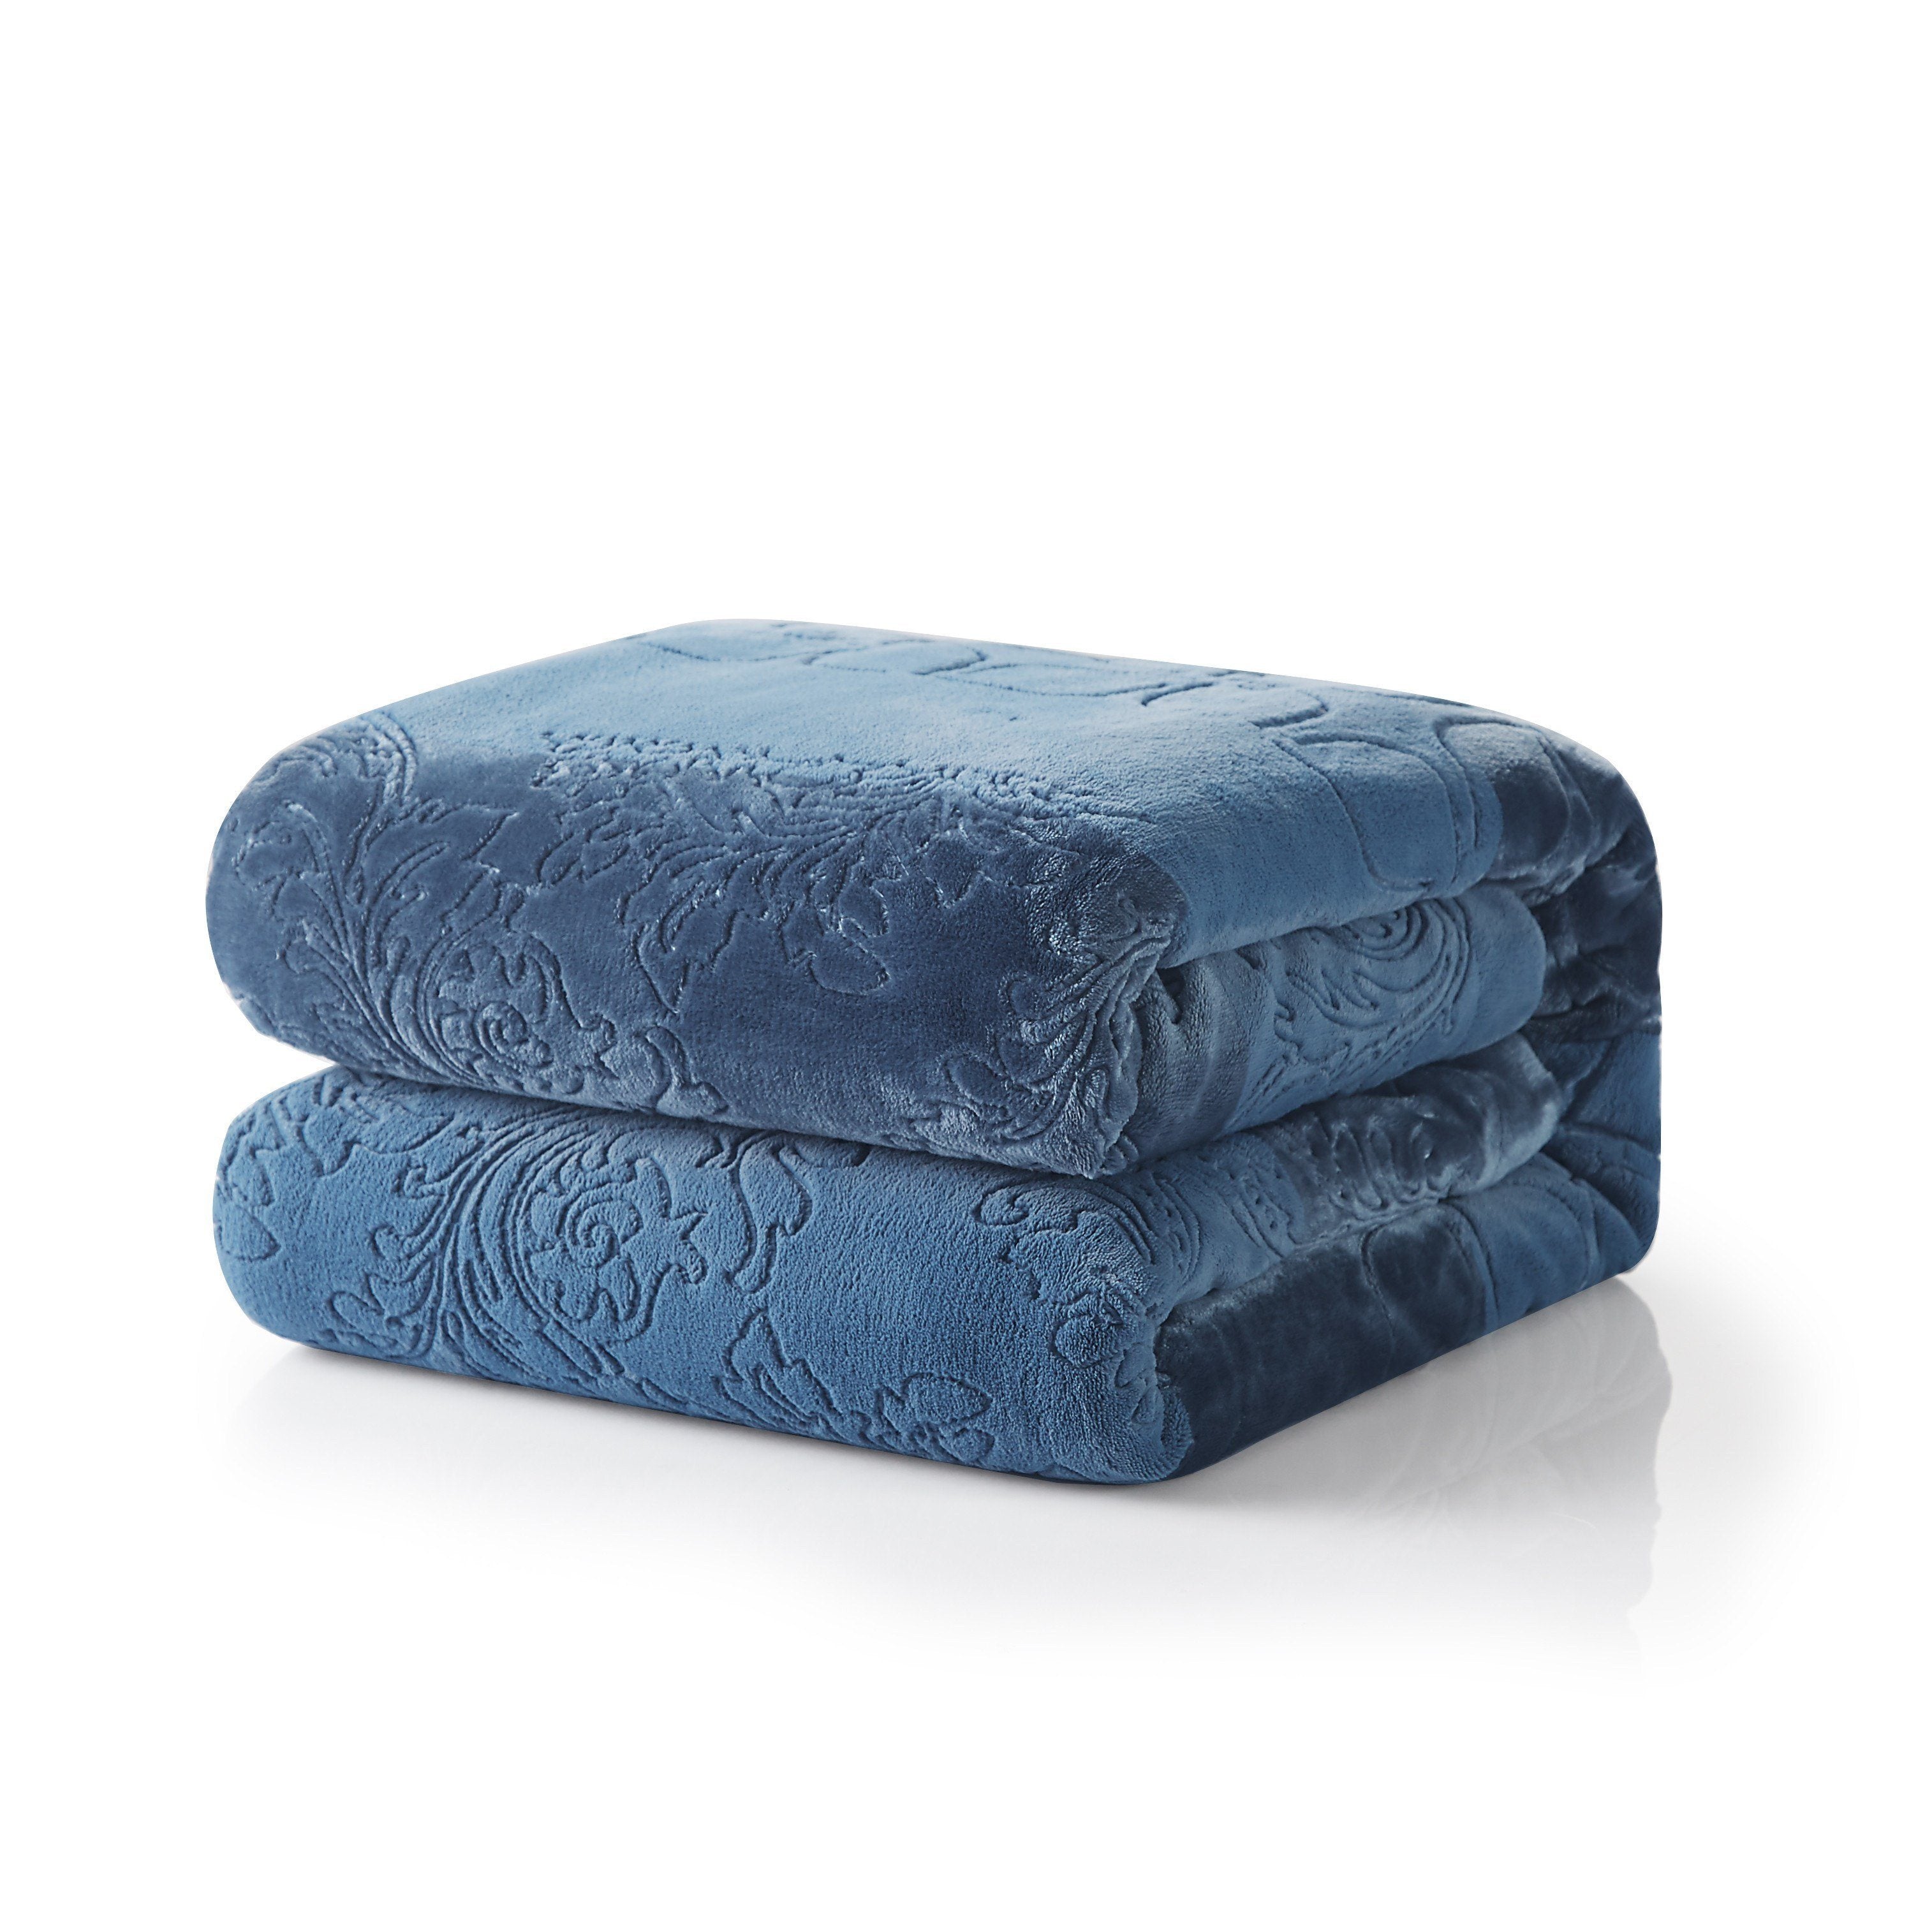 Tache Solid Embossed Rainy Day Grey Blue Sherpa Throw Blanket (62090) - Tache Home Fashion